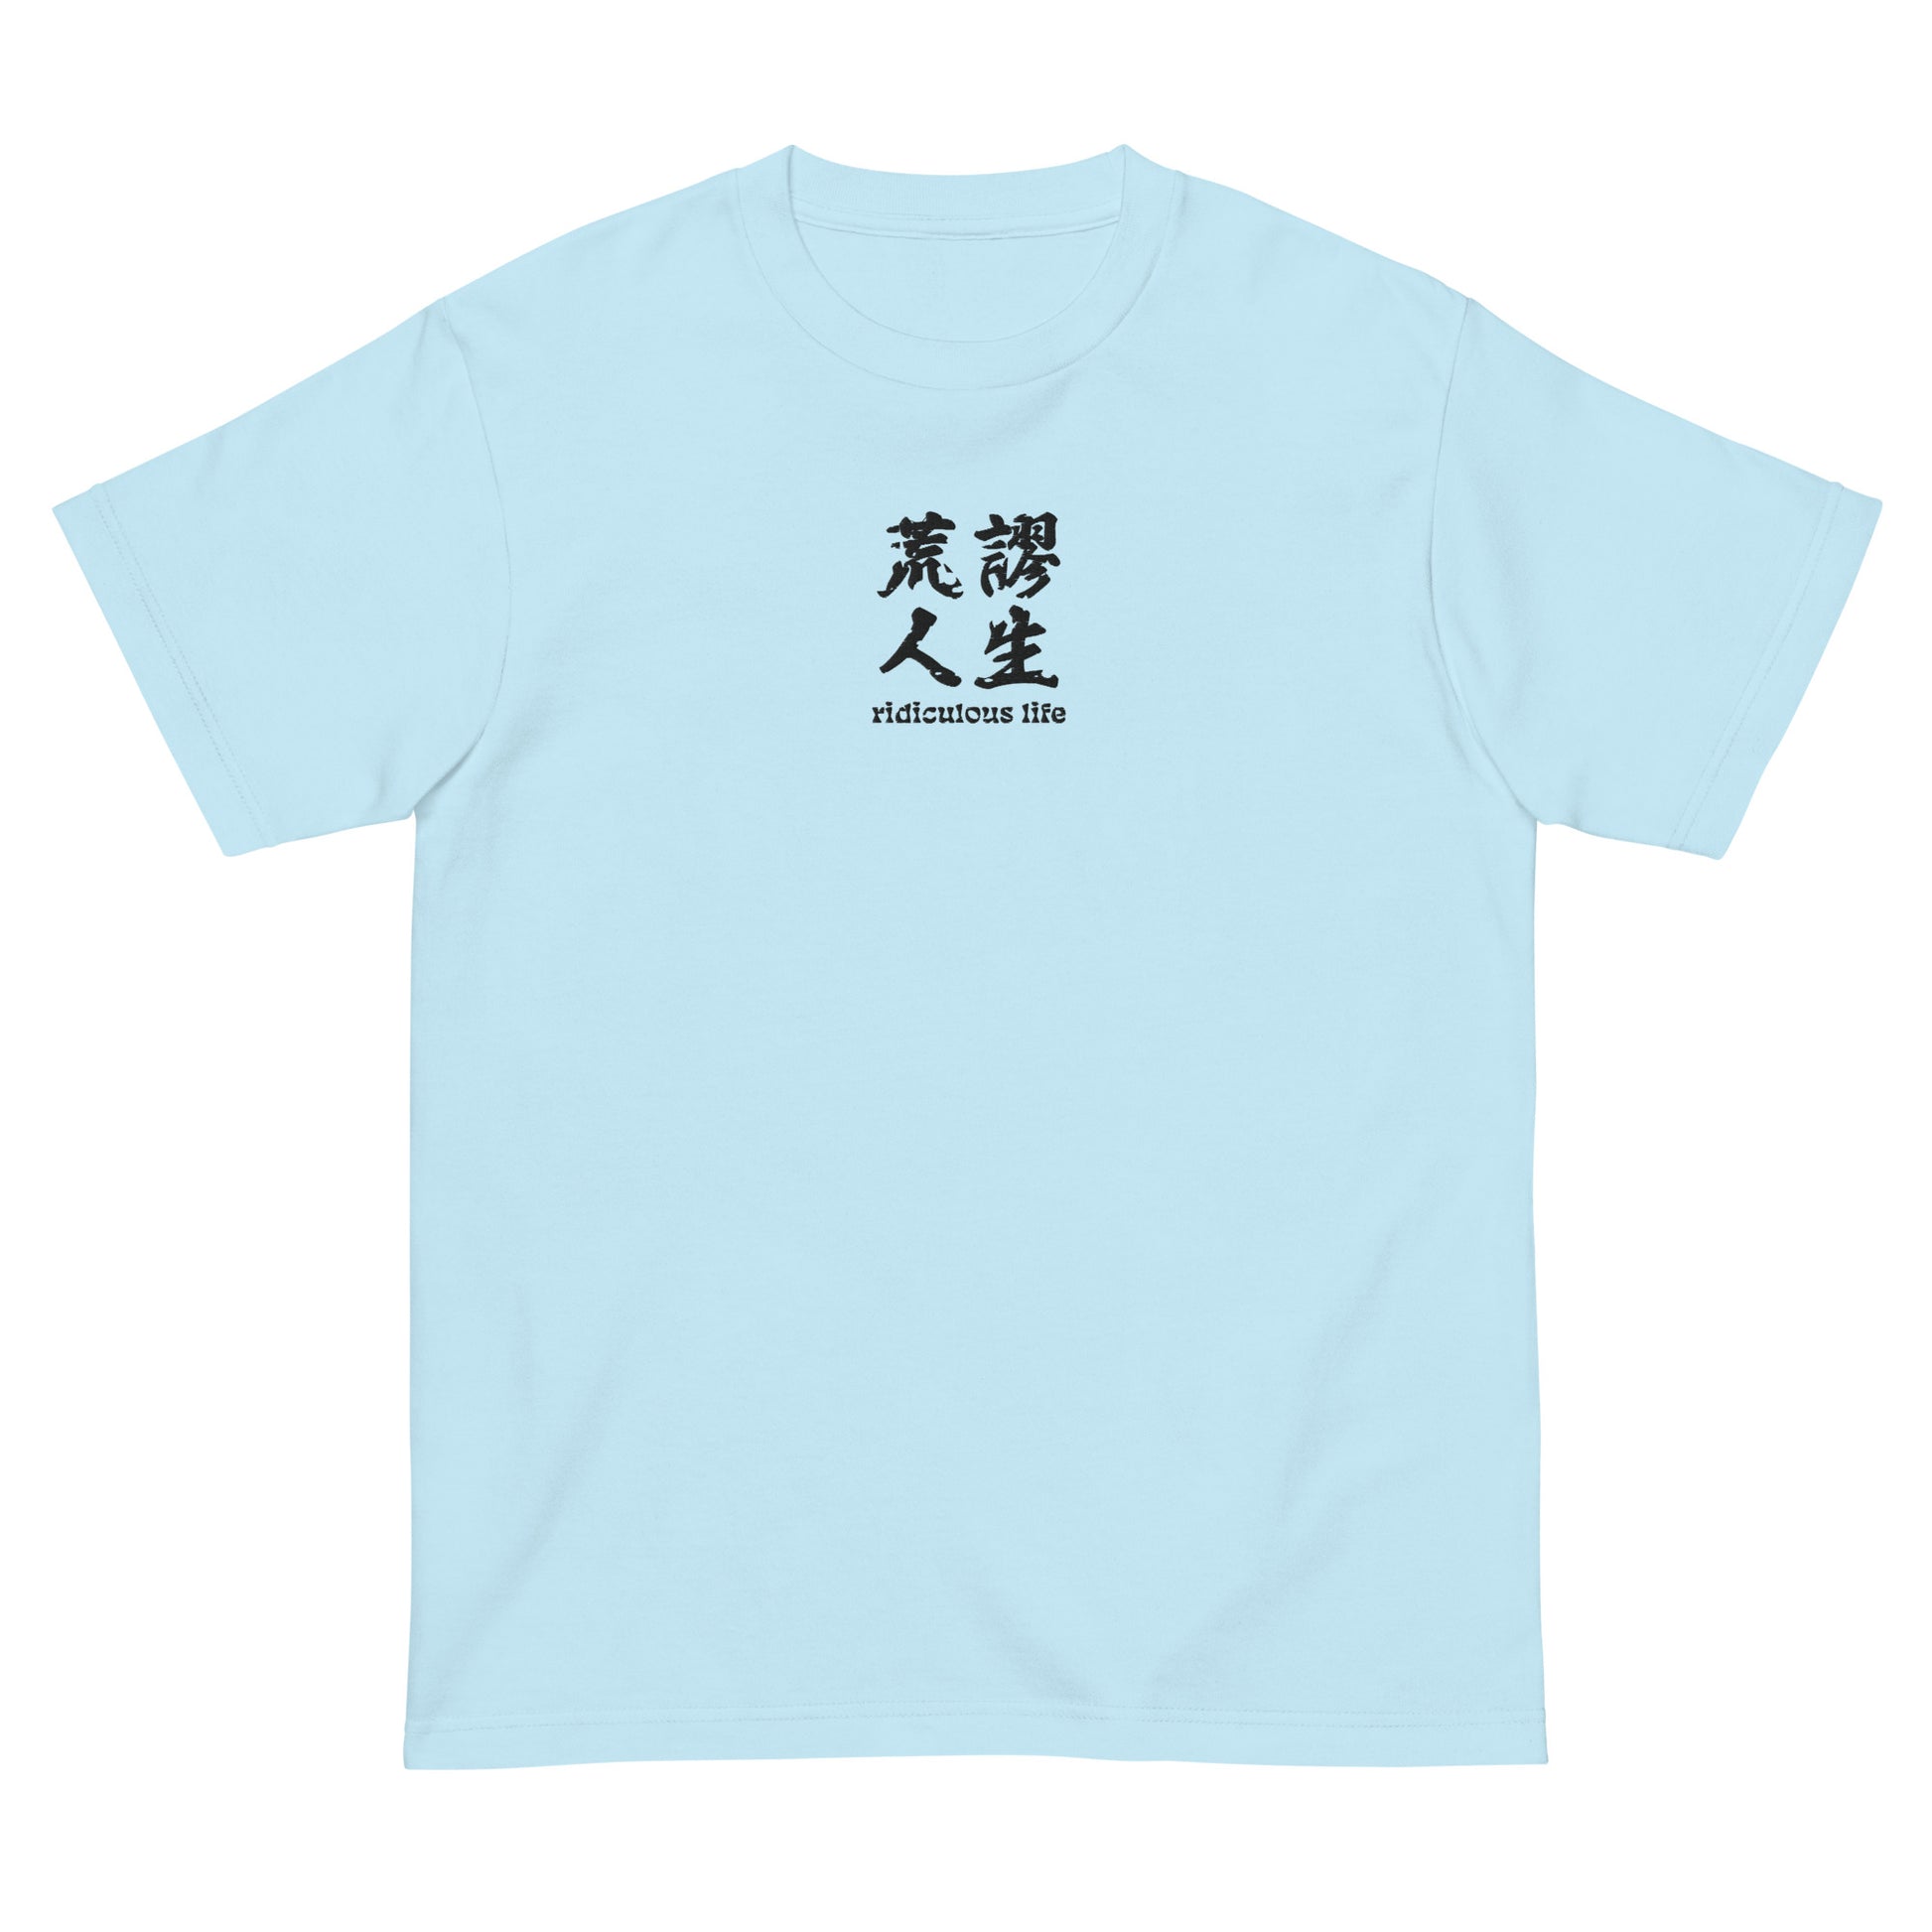 Light Blue High Quality Tee - Front Design with an Black Embroidery "Ridiculous Life" in Chinese and English